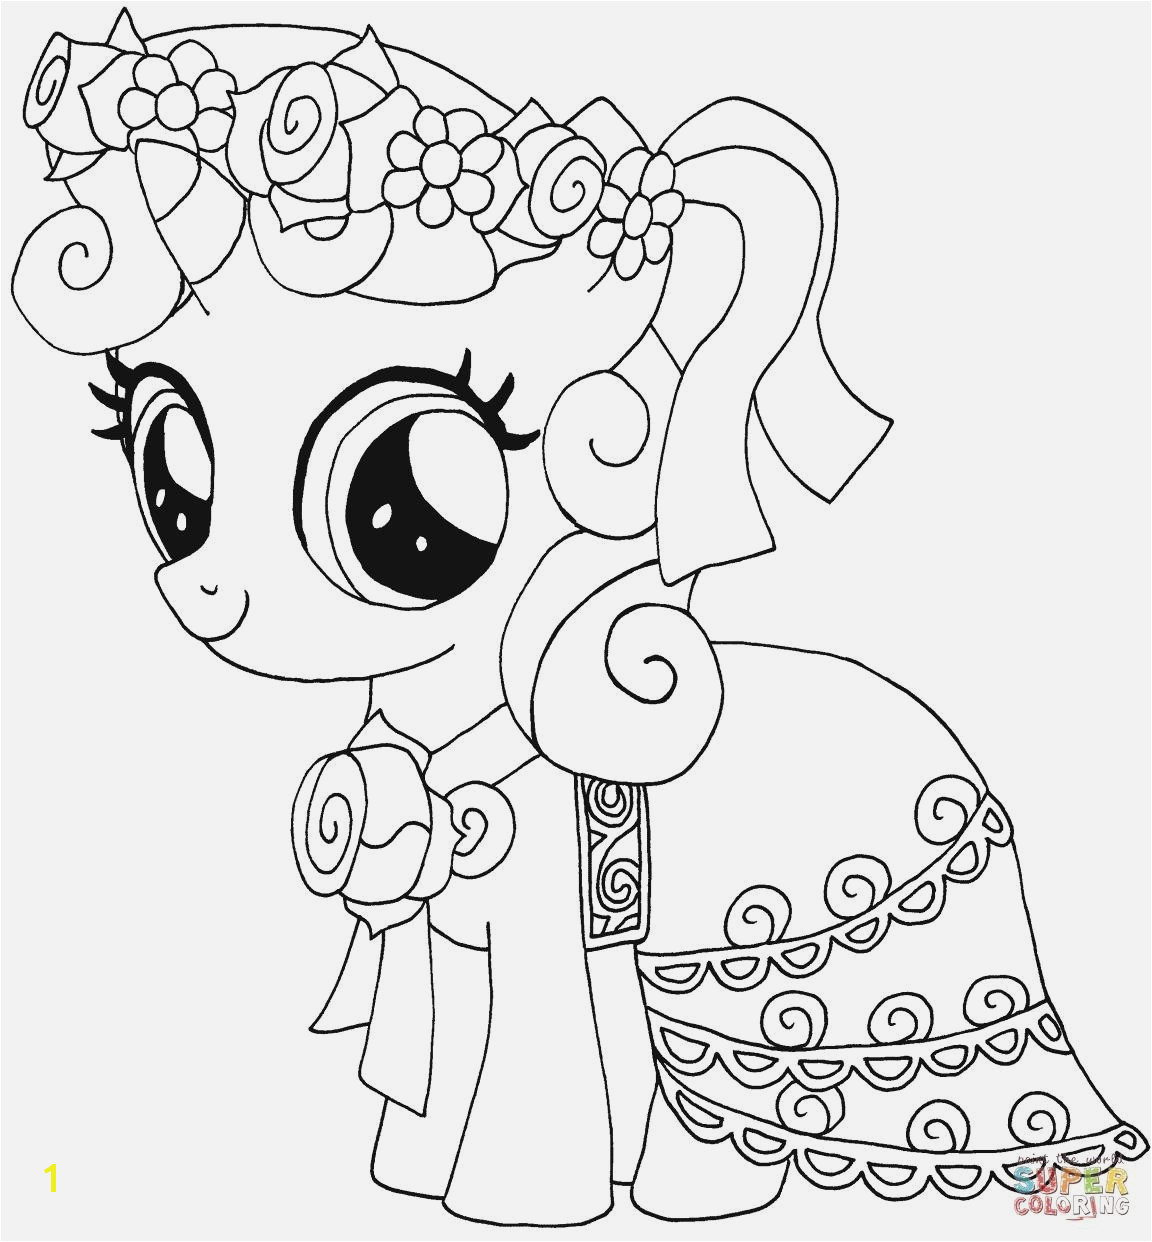 My Little Pony Coloring Pages Best Easy Coloring Pages My Little Pony Litten Coloring Pages Lovely Best Od